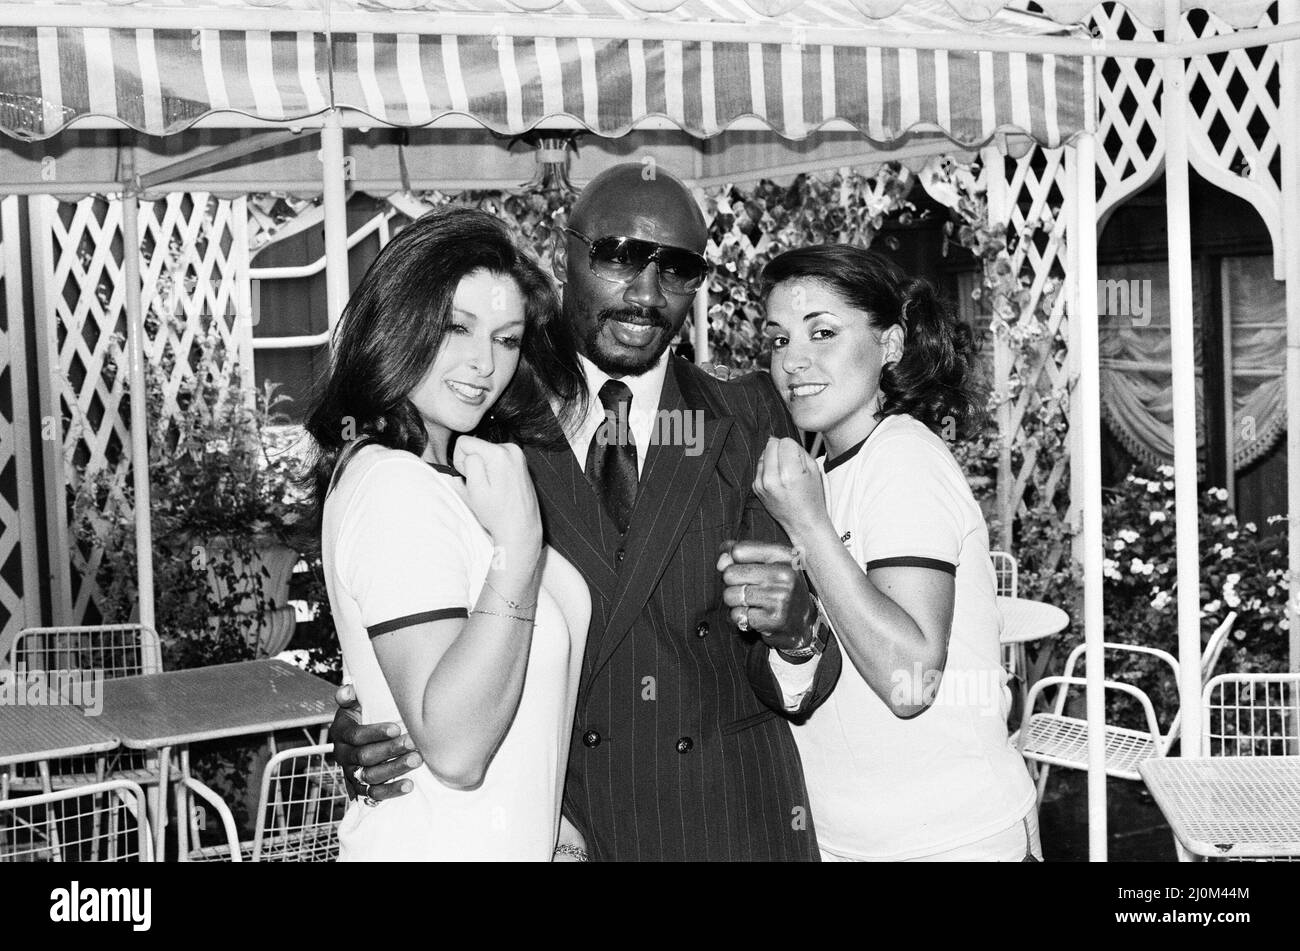 Marvin Hagler in London to challenge WBC, WBA champion Alan Minter. Hagler won by TKO in the third round. Hagler went six years undefeated before losing his titles to Sugar Ray Leonard in 1987.(Picture) Hagler posing with models. 18th September 1980 Stock Photo